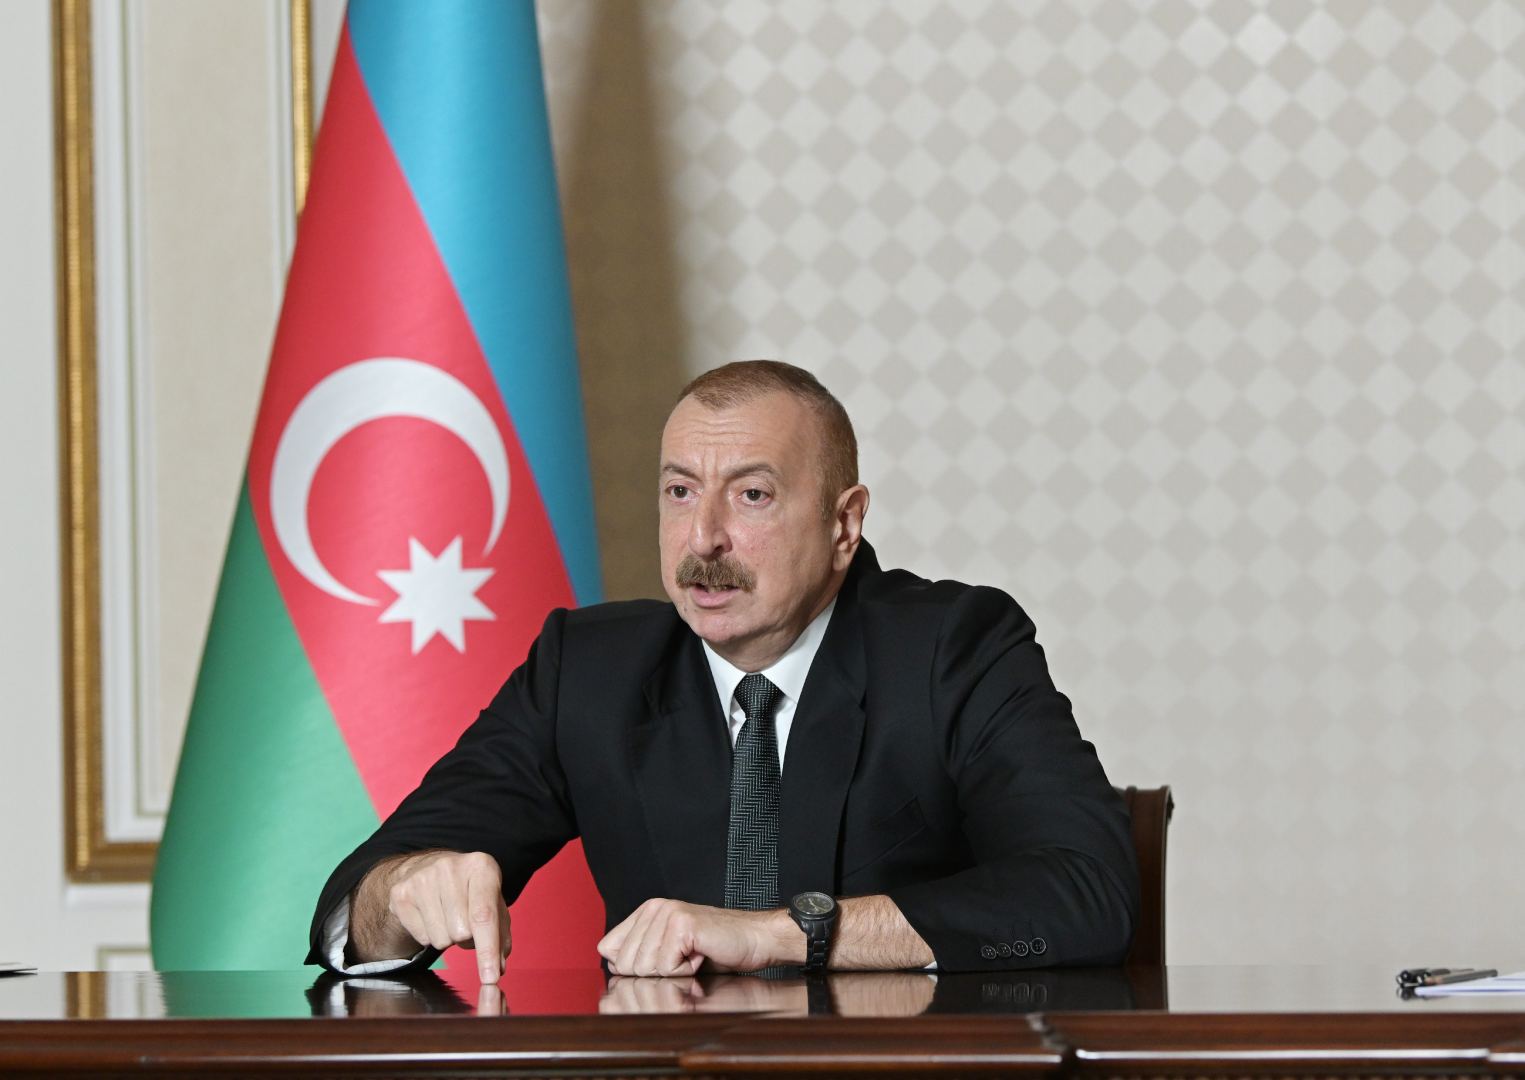 President Ilham Aliyev: As long as there is no progress in negotiations, there can be no talk of any cooperation with Armenia